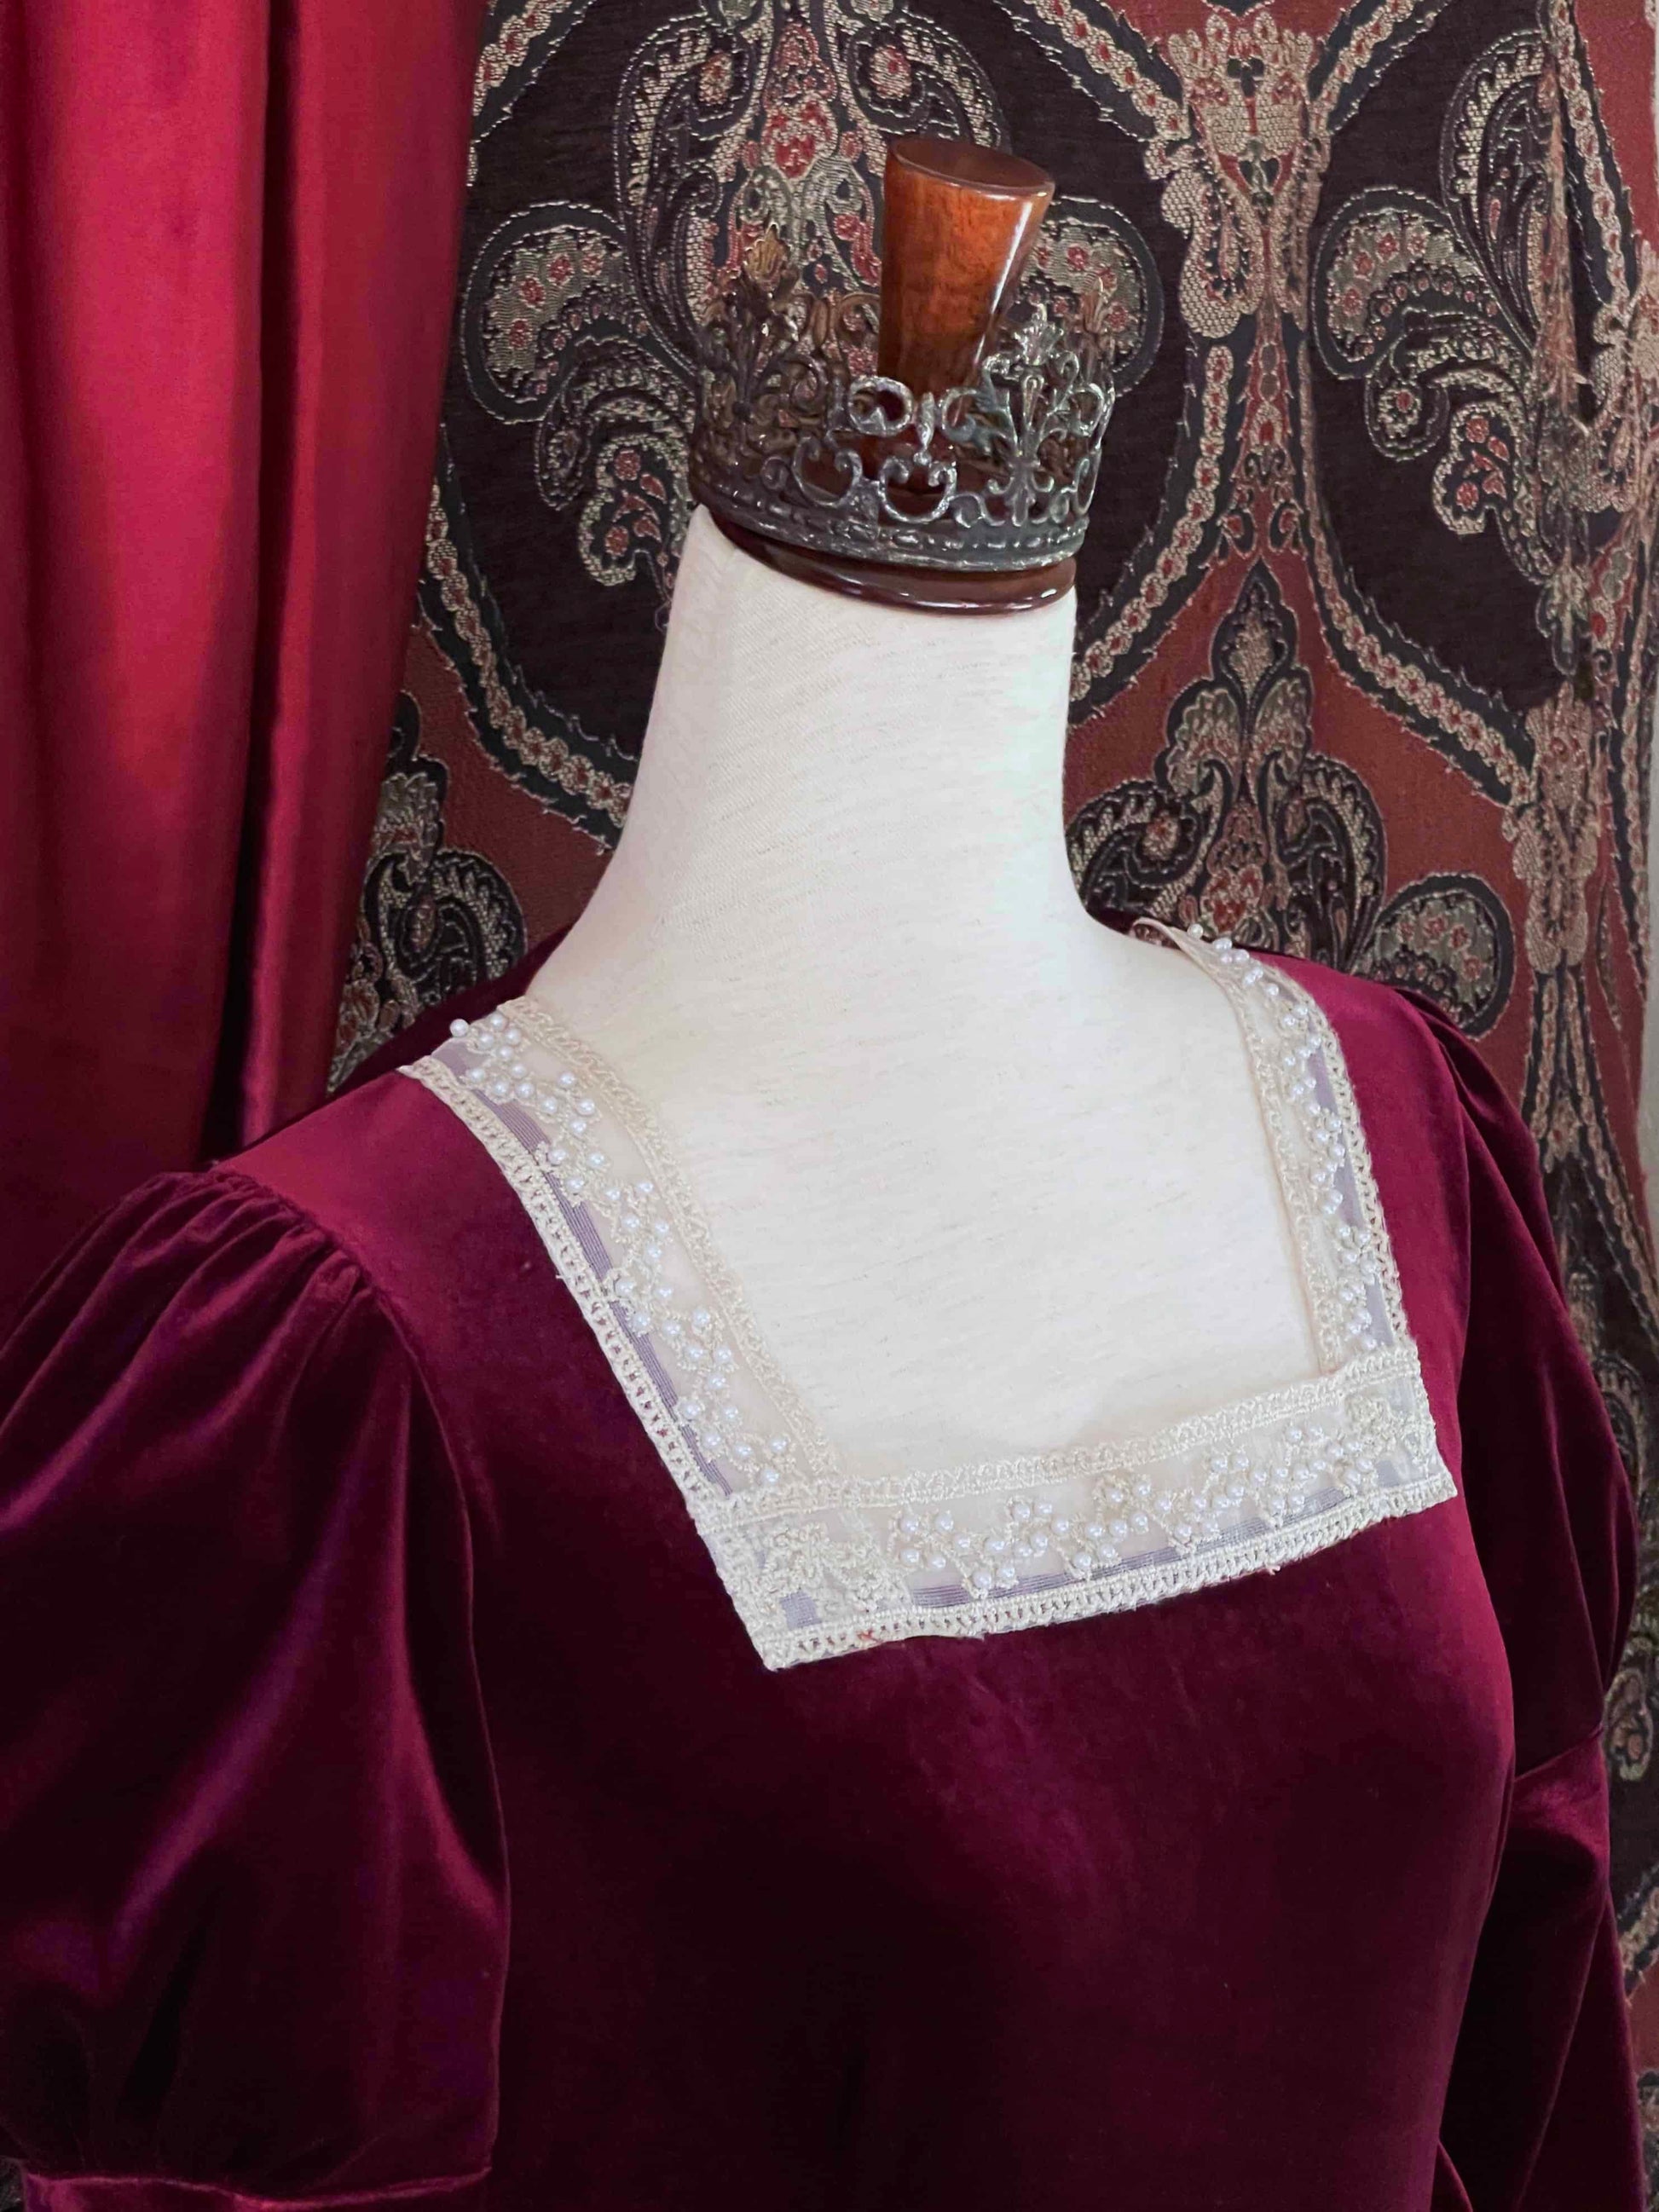 A Renaissance and Tudor inspired Burgundy Velvet Juliet Sleeve Gown with lace trim is pictured on a mannequin in front of a historical ornate backdrop.